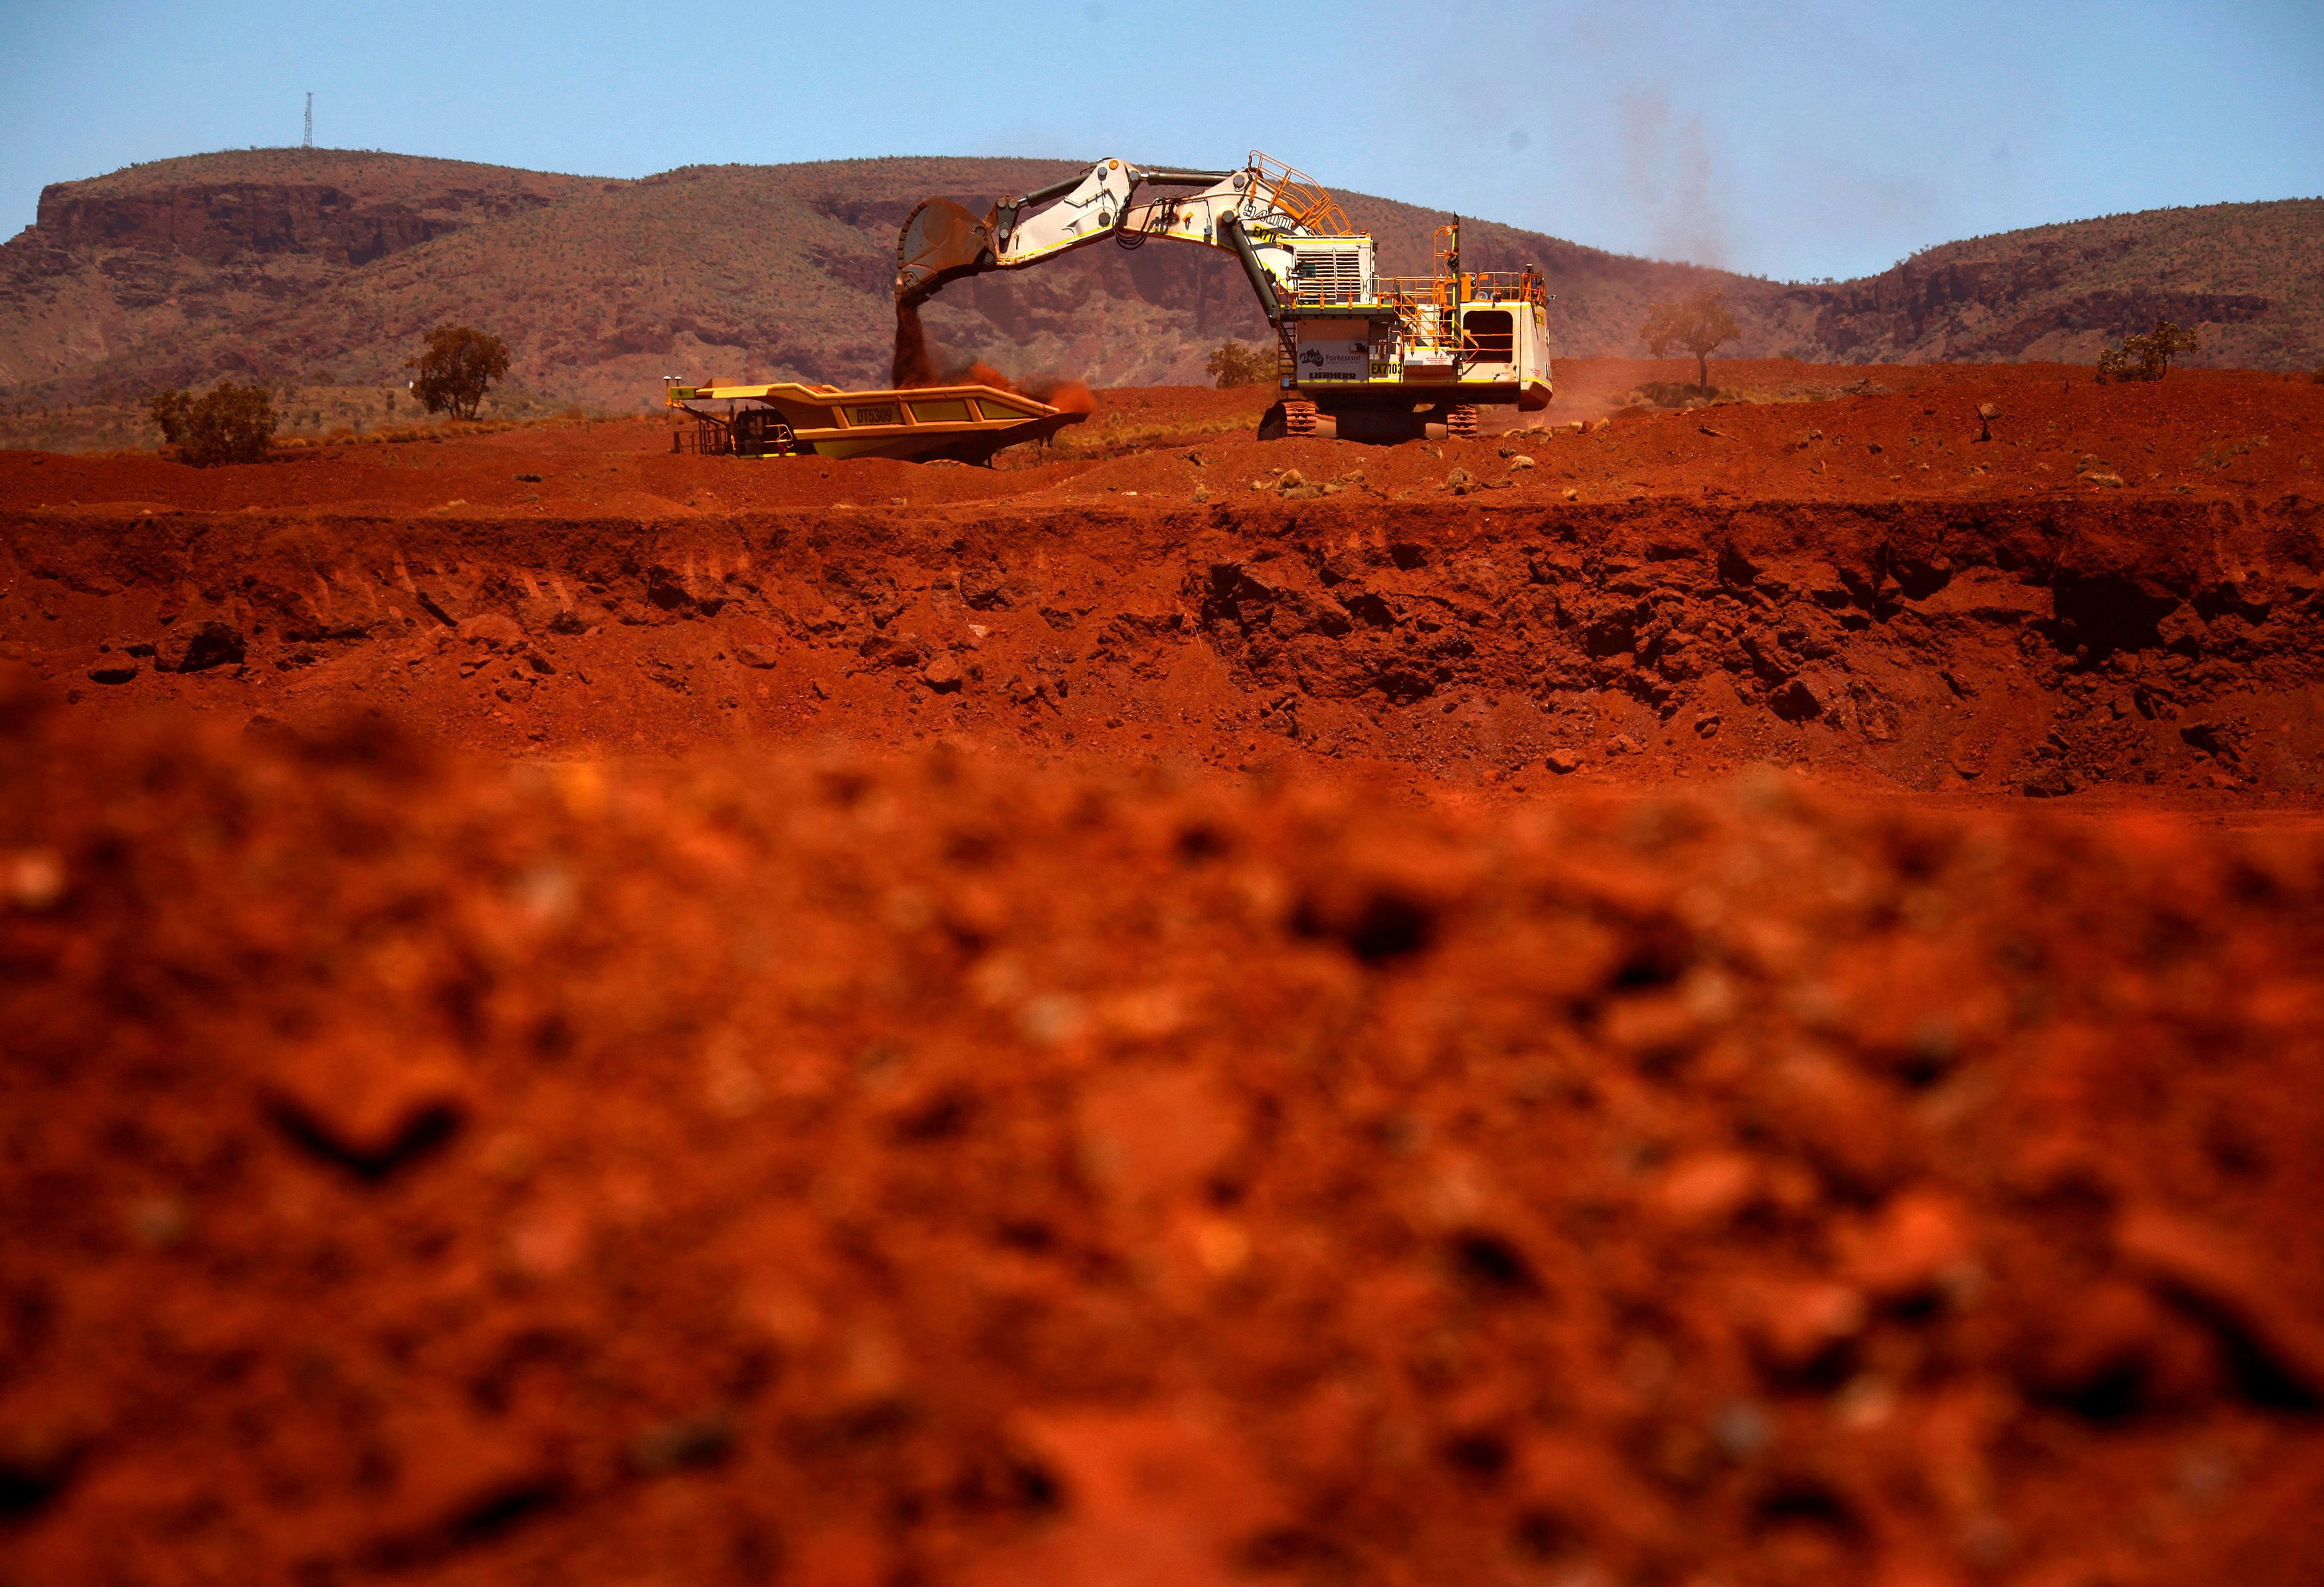 An excavator loads iron ore into a truck at a mine in the Pilbara region of Western Australia. Photo: Reuters